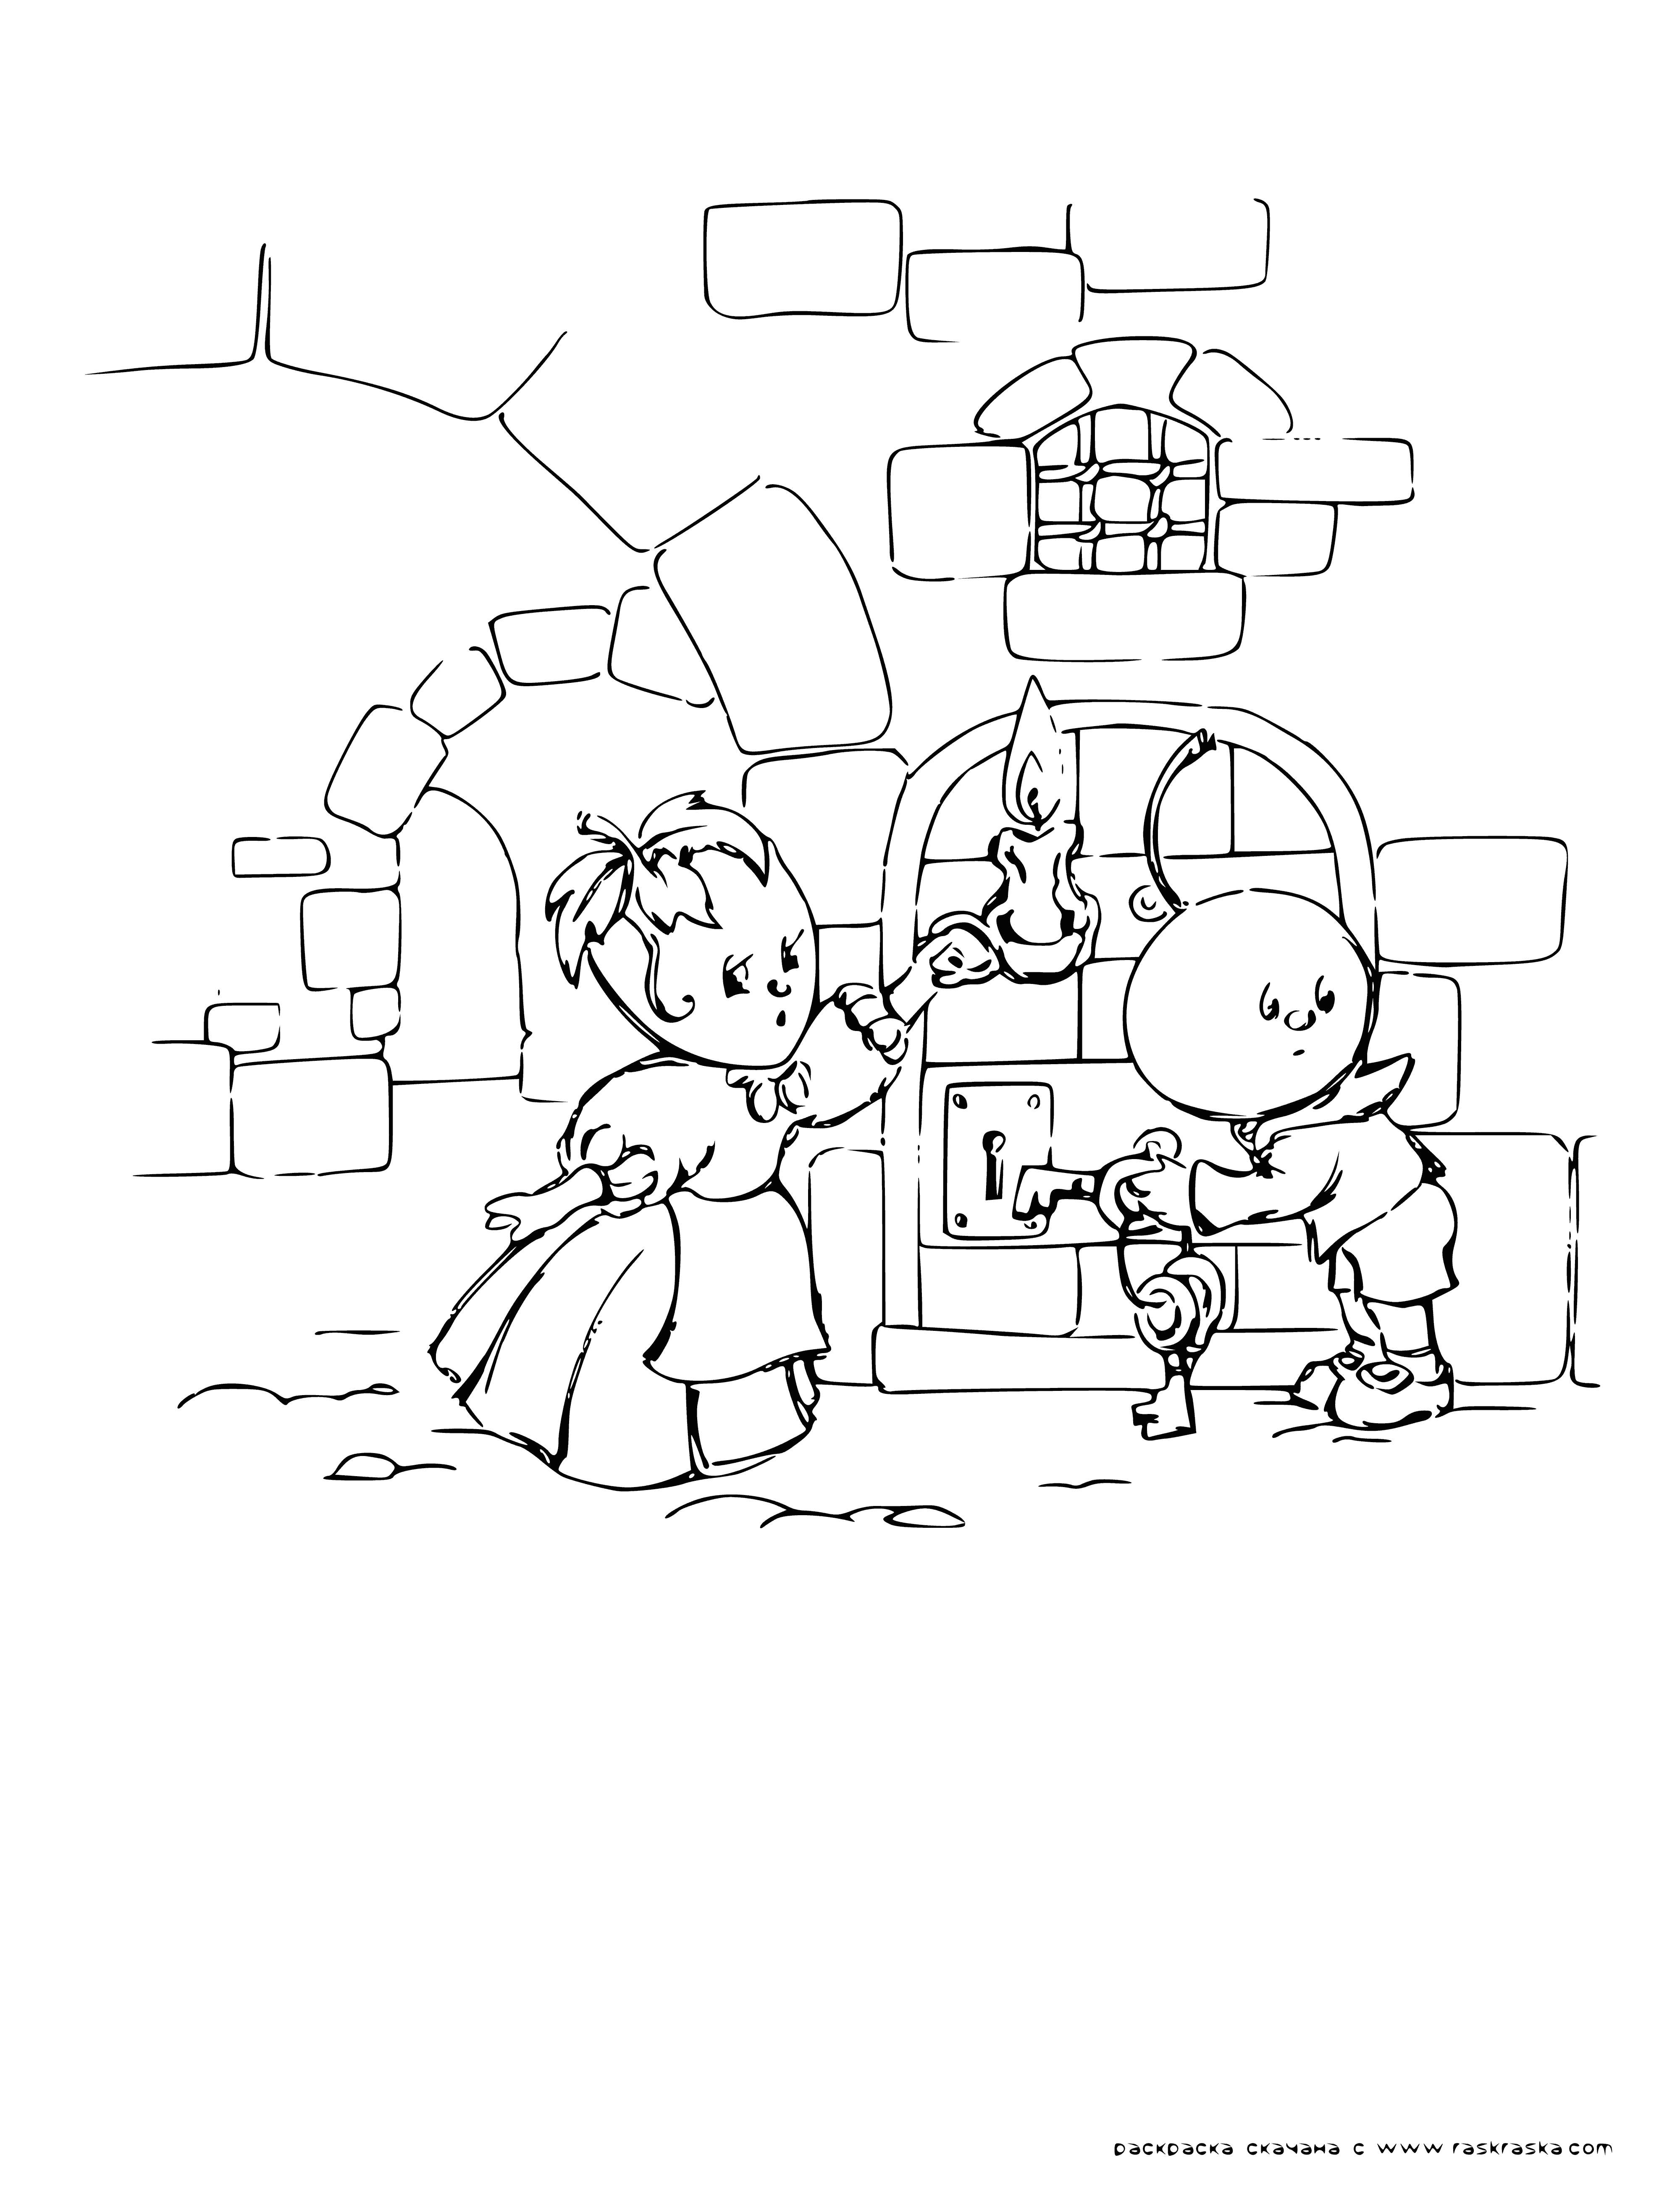 coloring page: Cipollino defeats cruel prince & rescues princess with help of friends, Lightning Bug, Grasshopper, & Bumblebee. They live happily ever after.